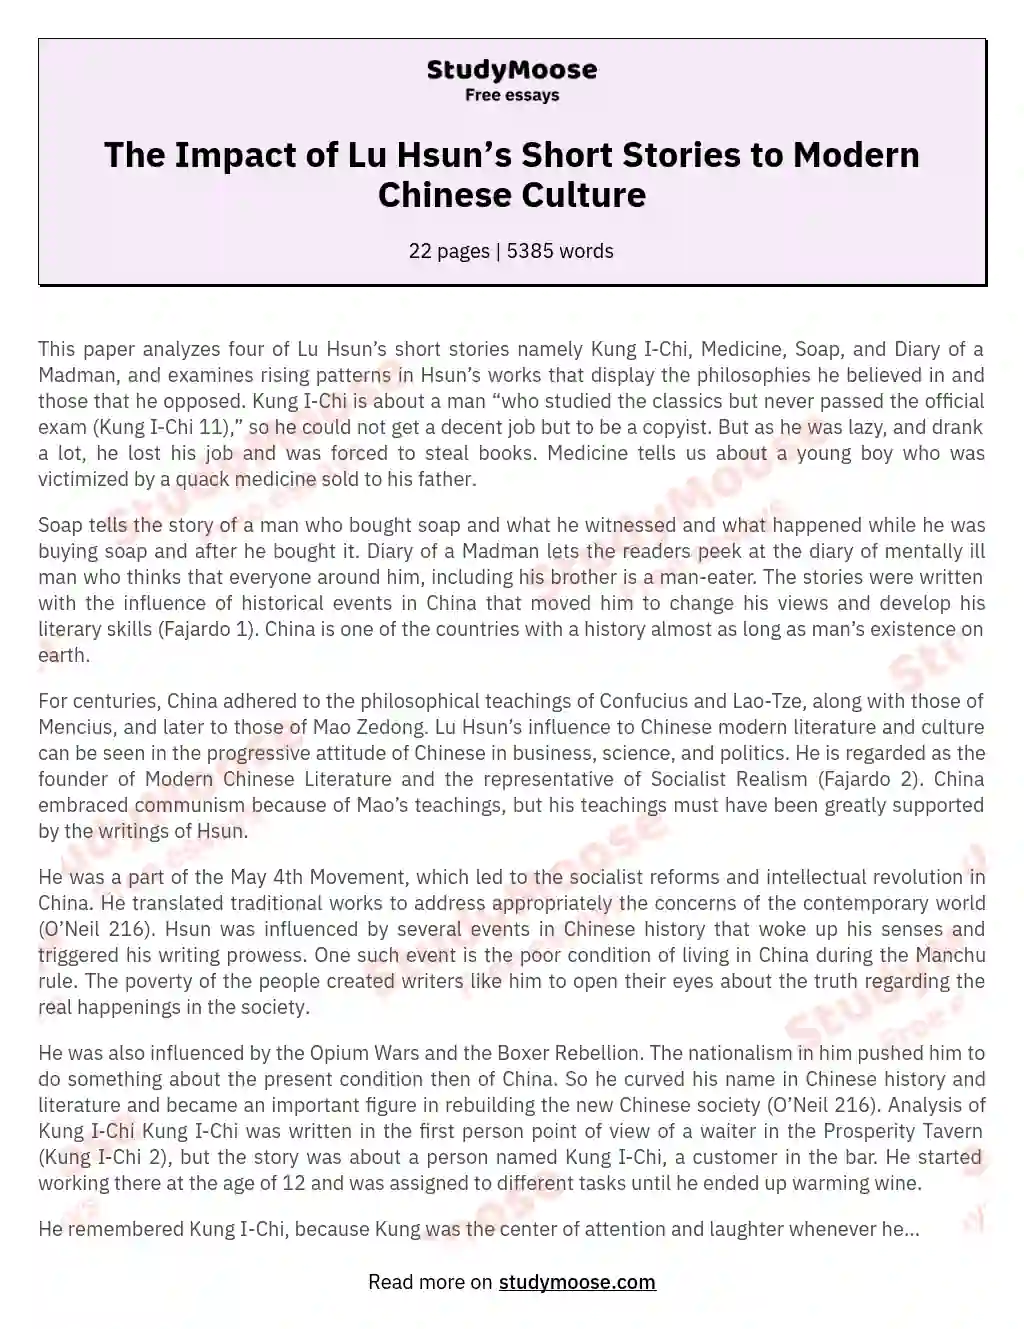 The Impact of Lu Hsun’s Short Stories to Modern Chinese Culture